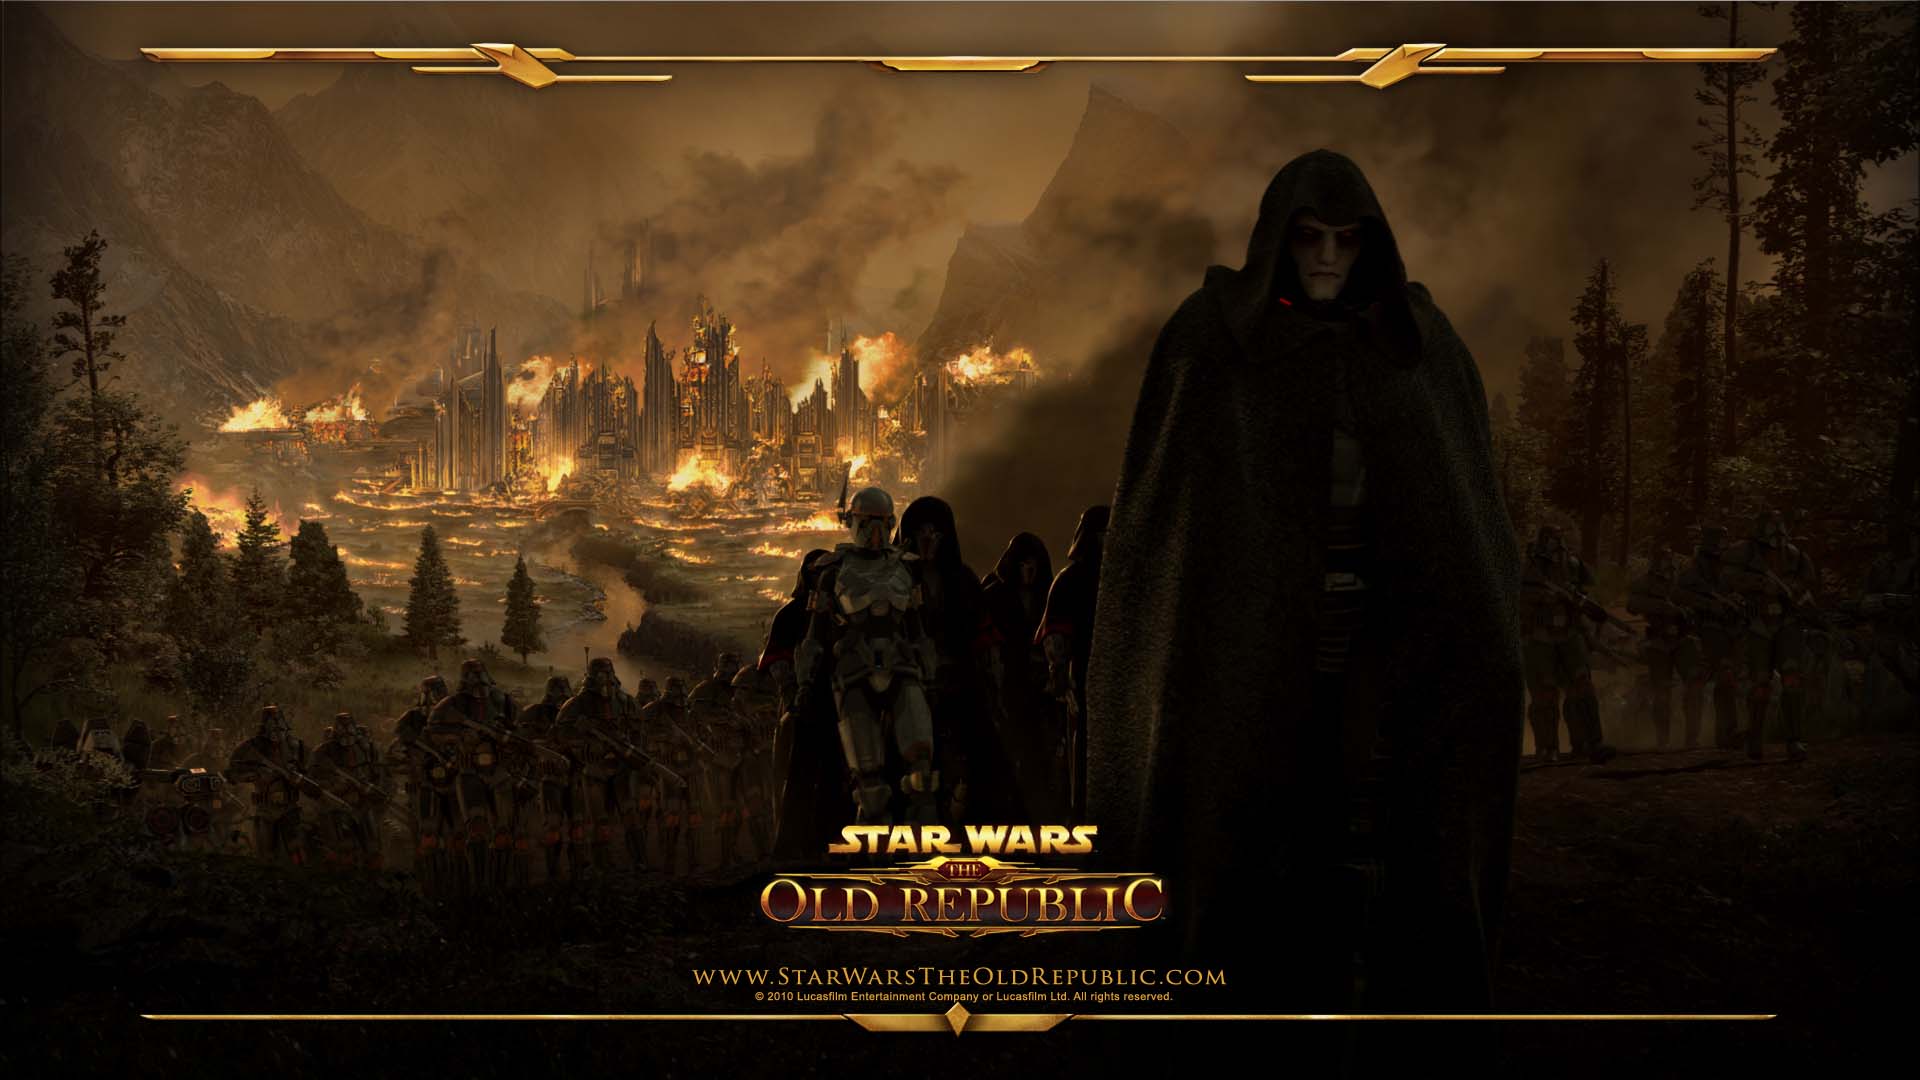 You are currently viewing Star Wars The Old Republic, en quelle année sommes-nous ?